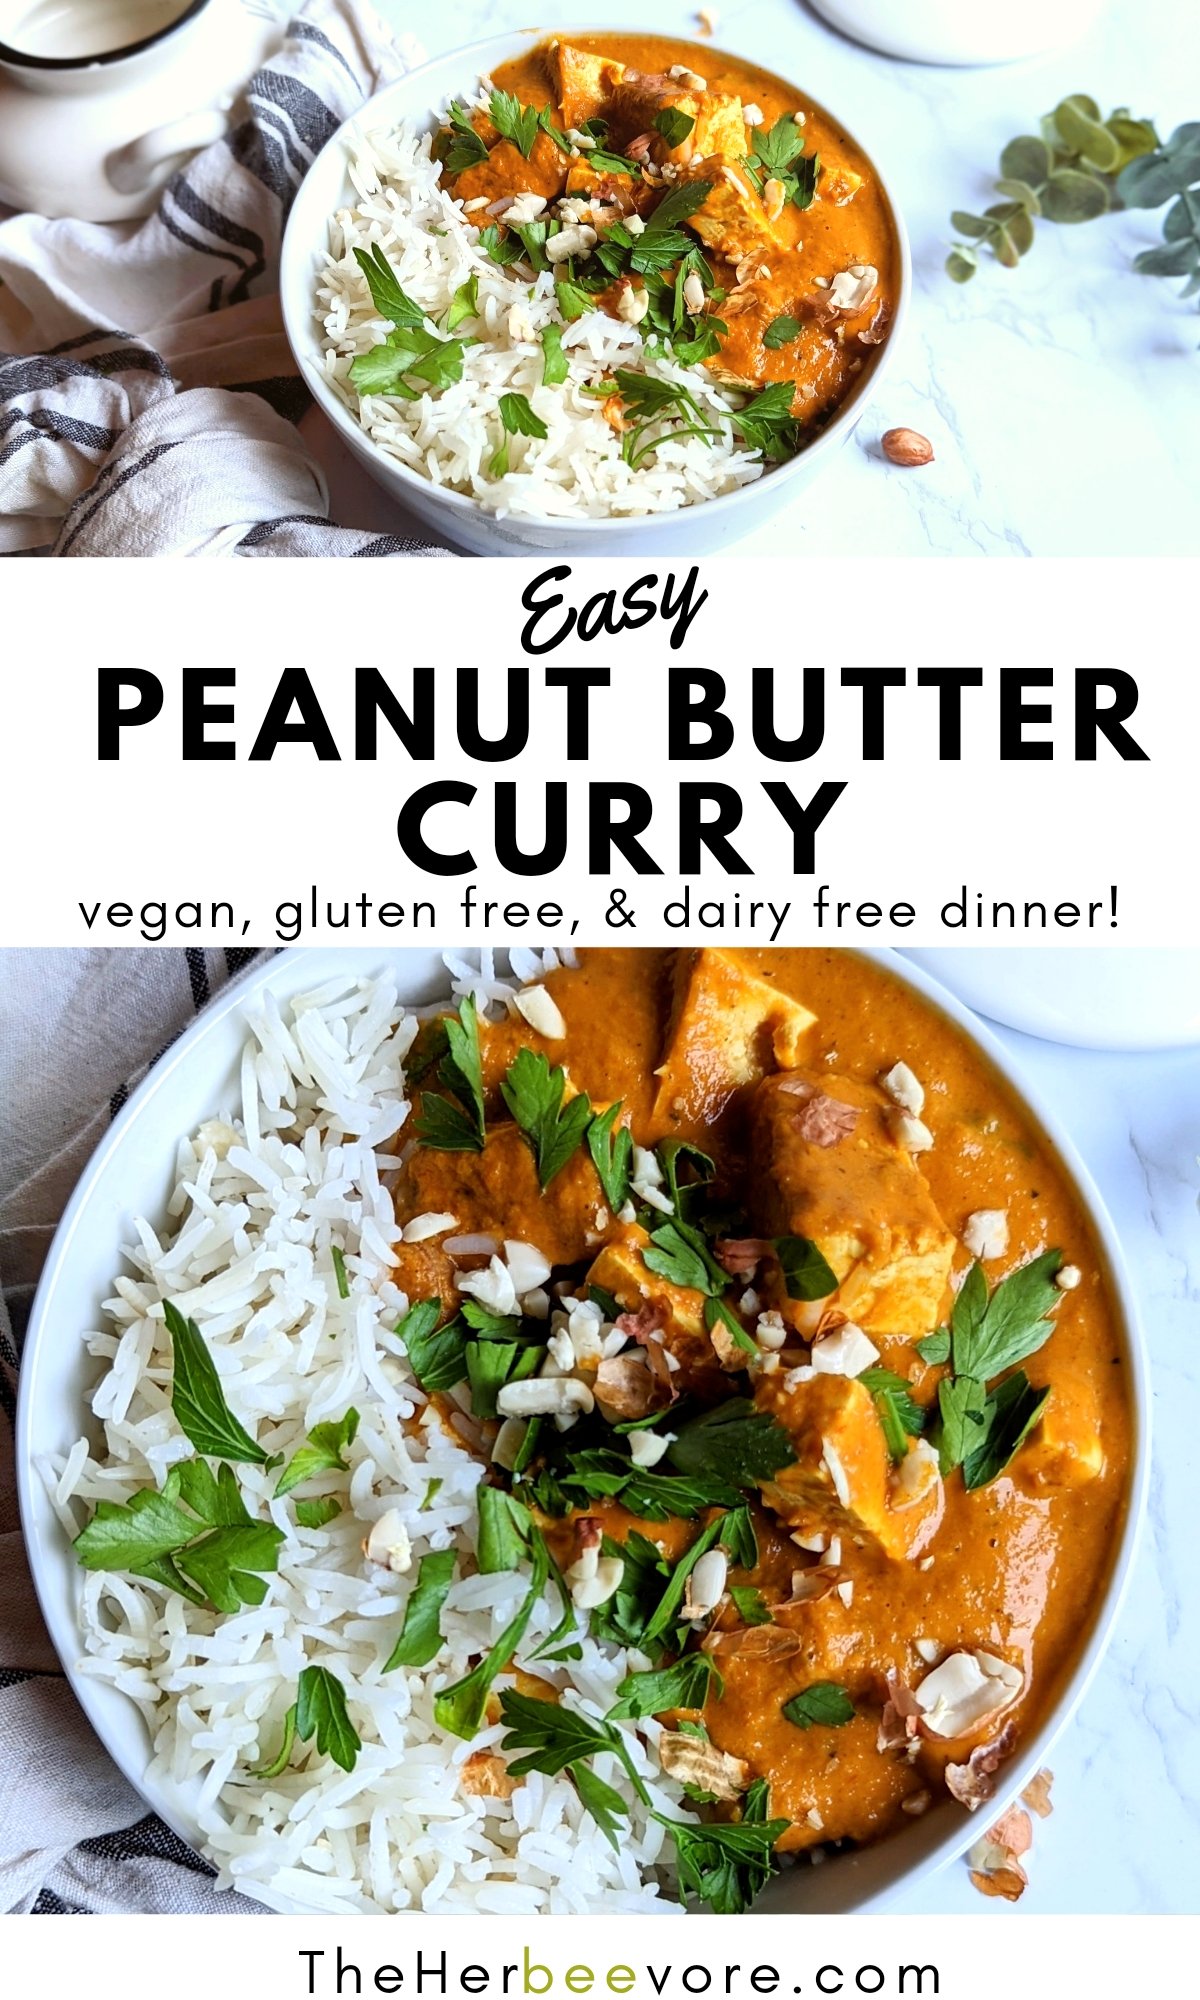 peanut butter curry recipe with creamy unsalted peanut butter peanuts paprika turmeric curry powder and vegetables